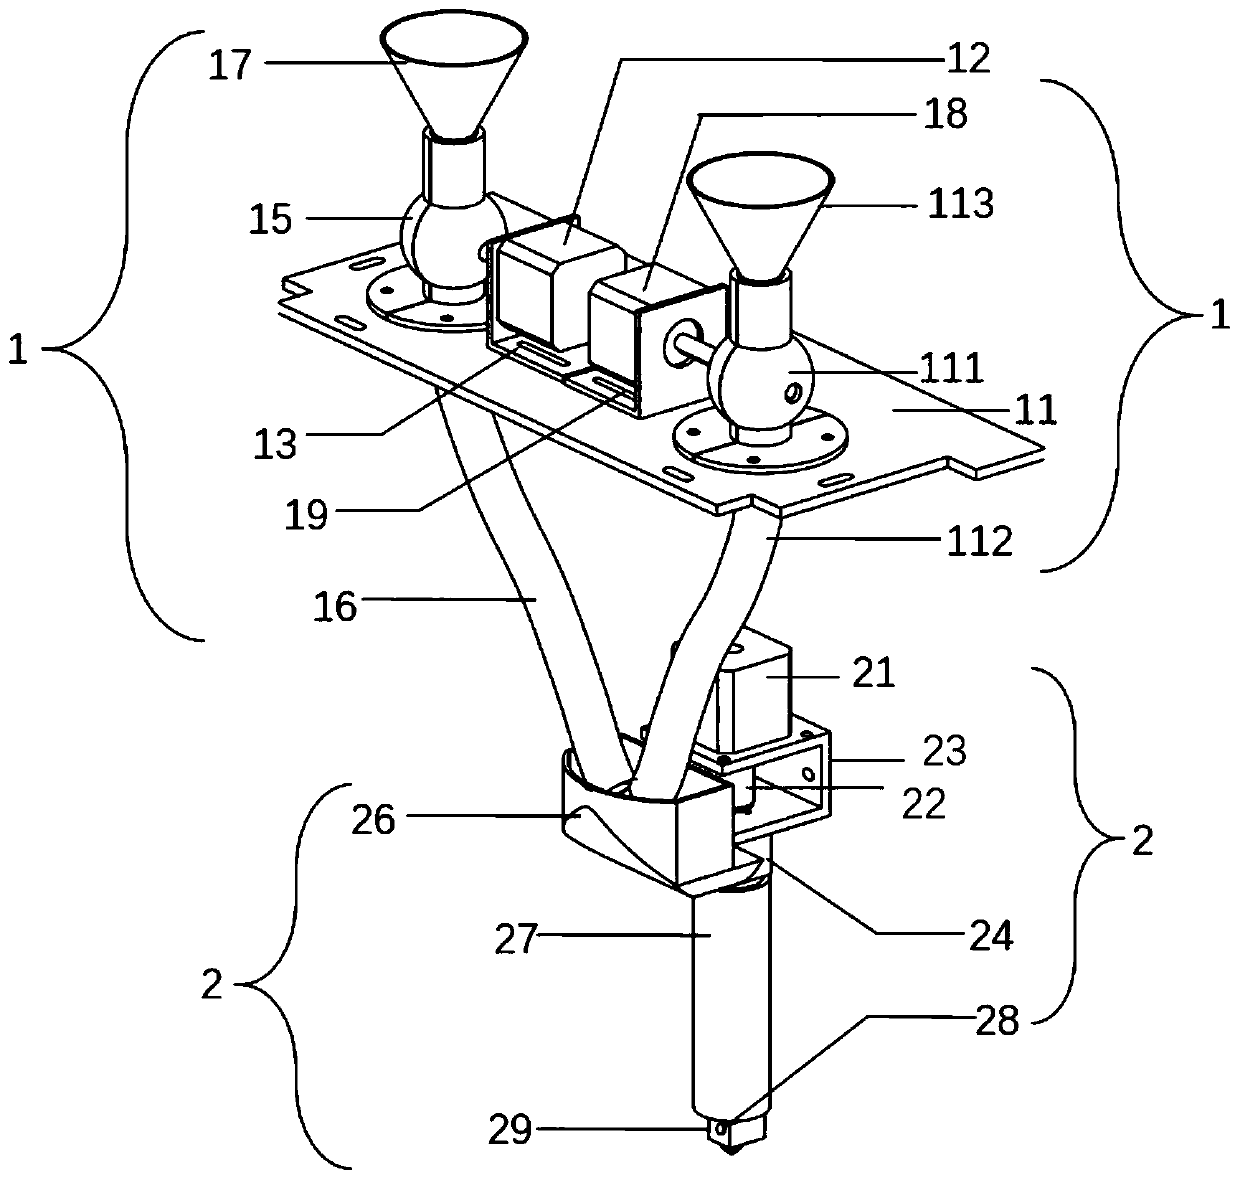 Multi-material gradient forming fusion extrusion system for 3D printing